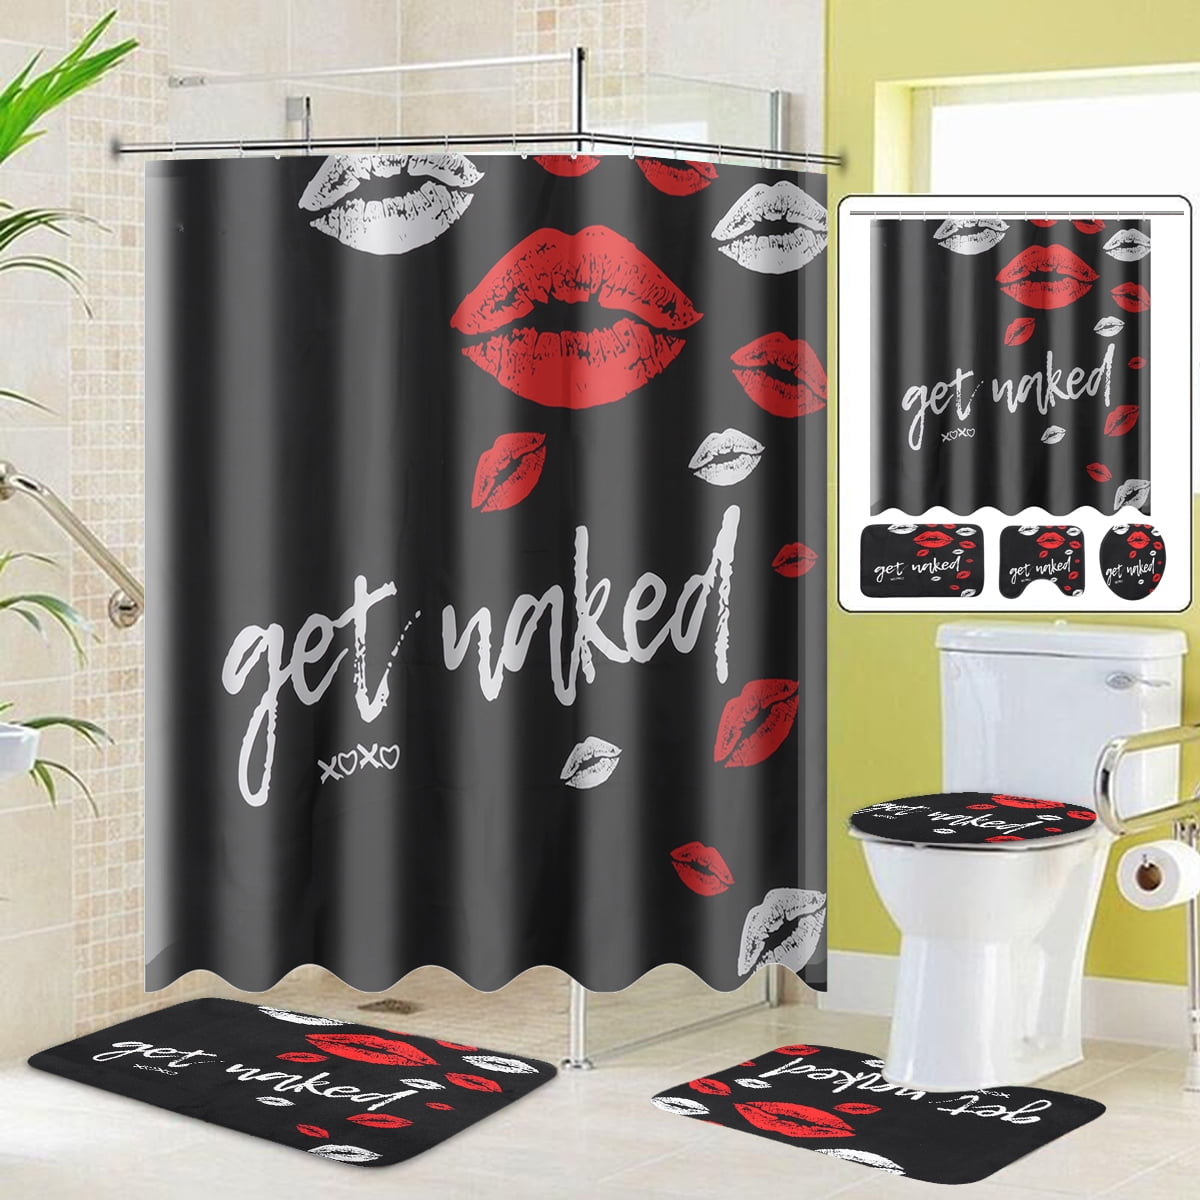 Ochine 4 Pcs Get Naked Shower Curtain Bathroom Set with Non-Slip Rug Toilet Lid Cover and Bath Mat with 12 Hooks Red Funny Kiss Decor Black Polyester Fabric Waterproof Bath Curtain